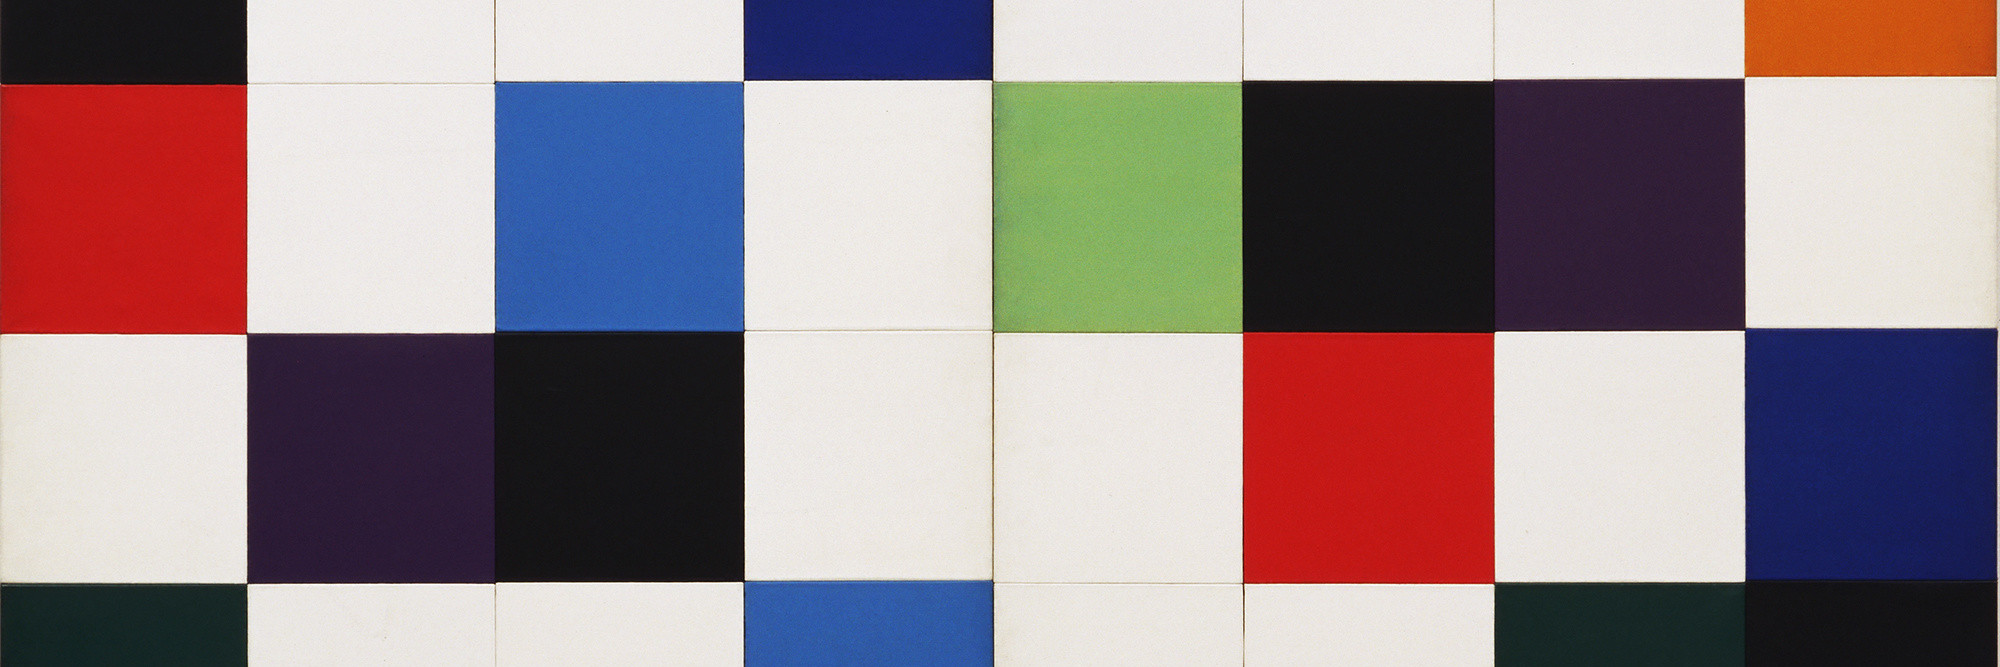 Ellsworth Kelly. Colors for a Large Wall. (1951). Oil on canvas. Sixty-four wood panels, overall: 7′ 10 1/2″ × 7′ 10 1/2″ (240 × 240 cm). The Museum of Modern Art, New York. Gift of the artist © 2008 Ellsworth Kelly